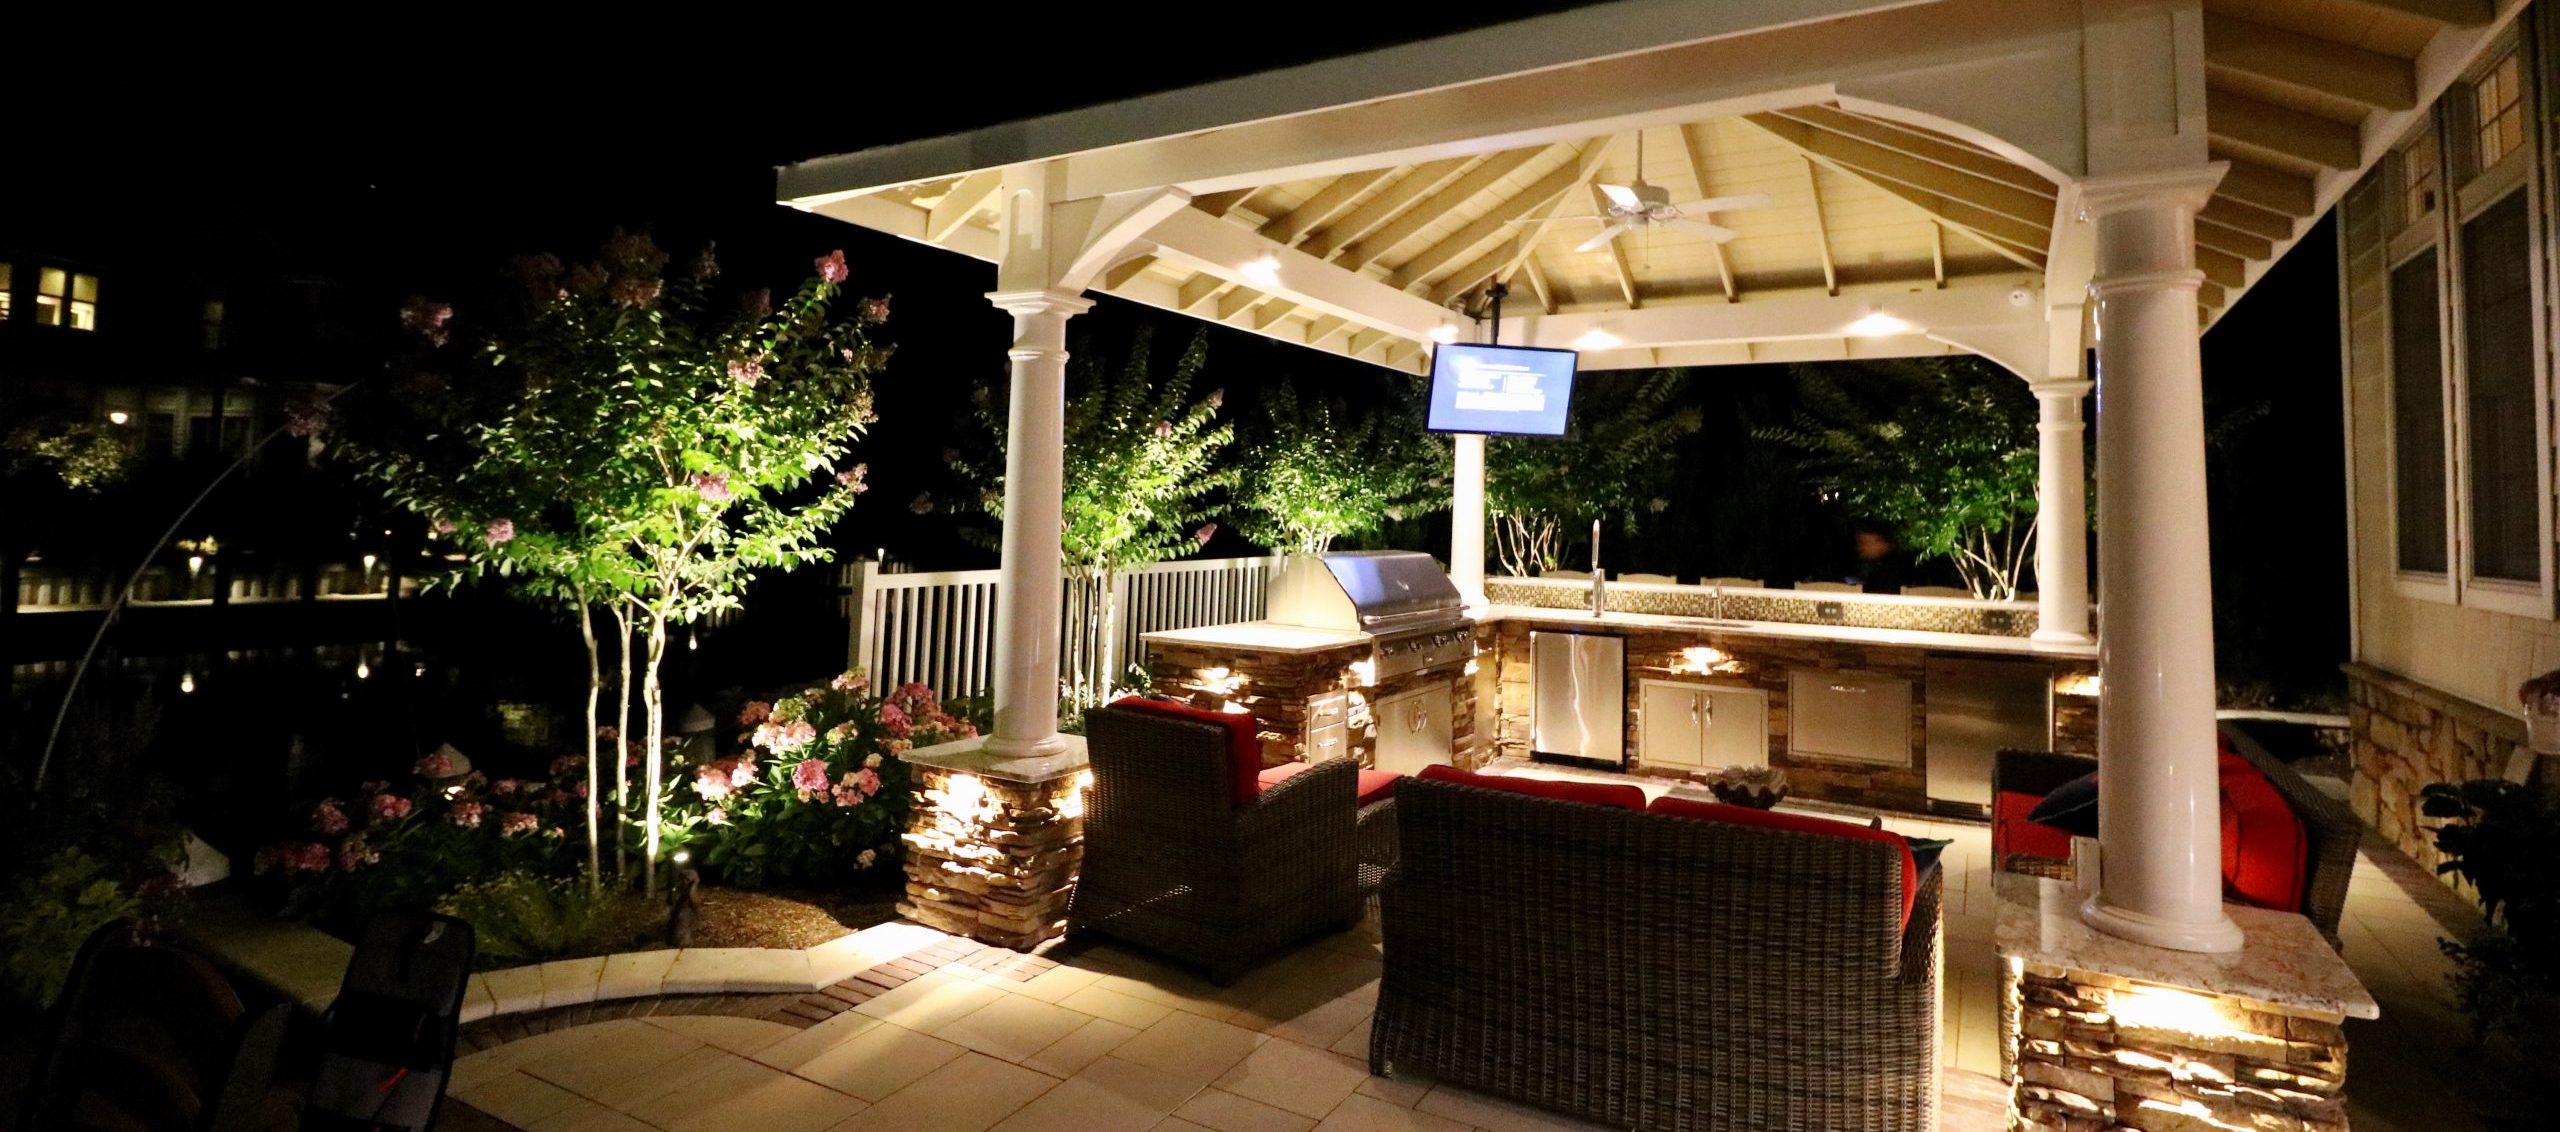 Luxury Outdoor Living Design - Create a 5-Star Experience